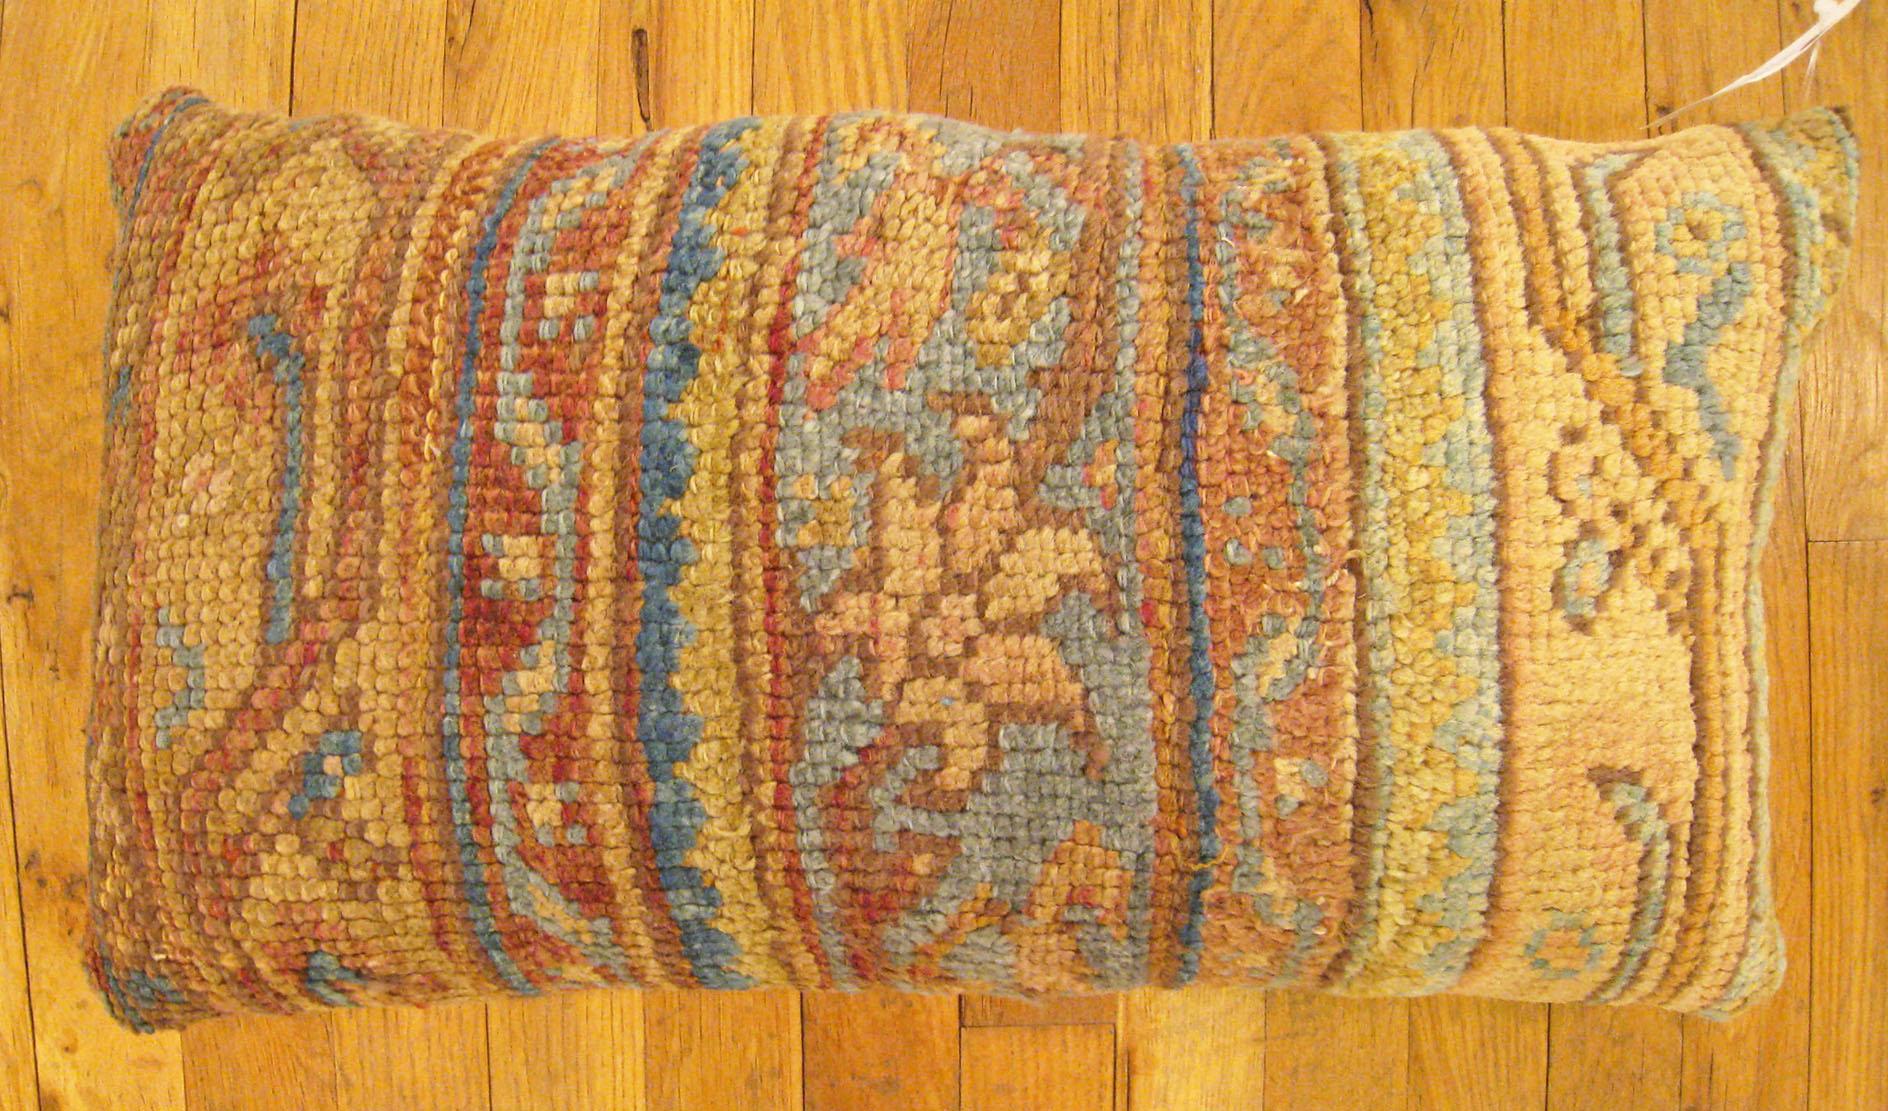 Antique Turkish Oushak Rug Pillow; size 2'0” x 1'3”.

An antique decorative pillow with geometric abstracts motif in a lbeige central field, size 2'0” x 1'3”. This lovely decorative pillow features an antique fabric of a Turkish Oushak rug pillow on